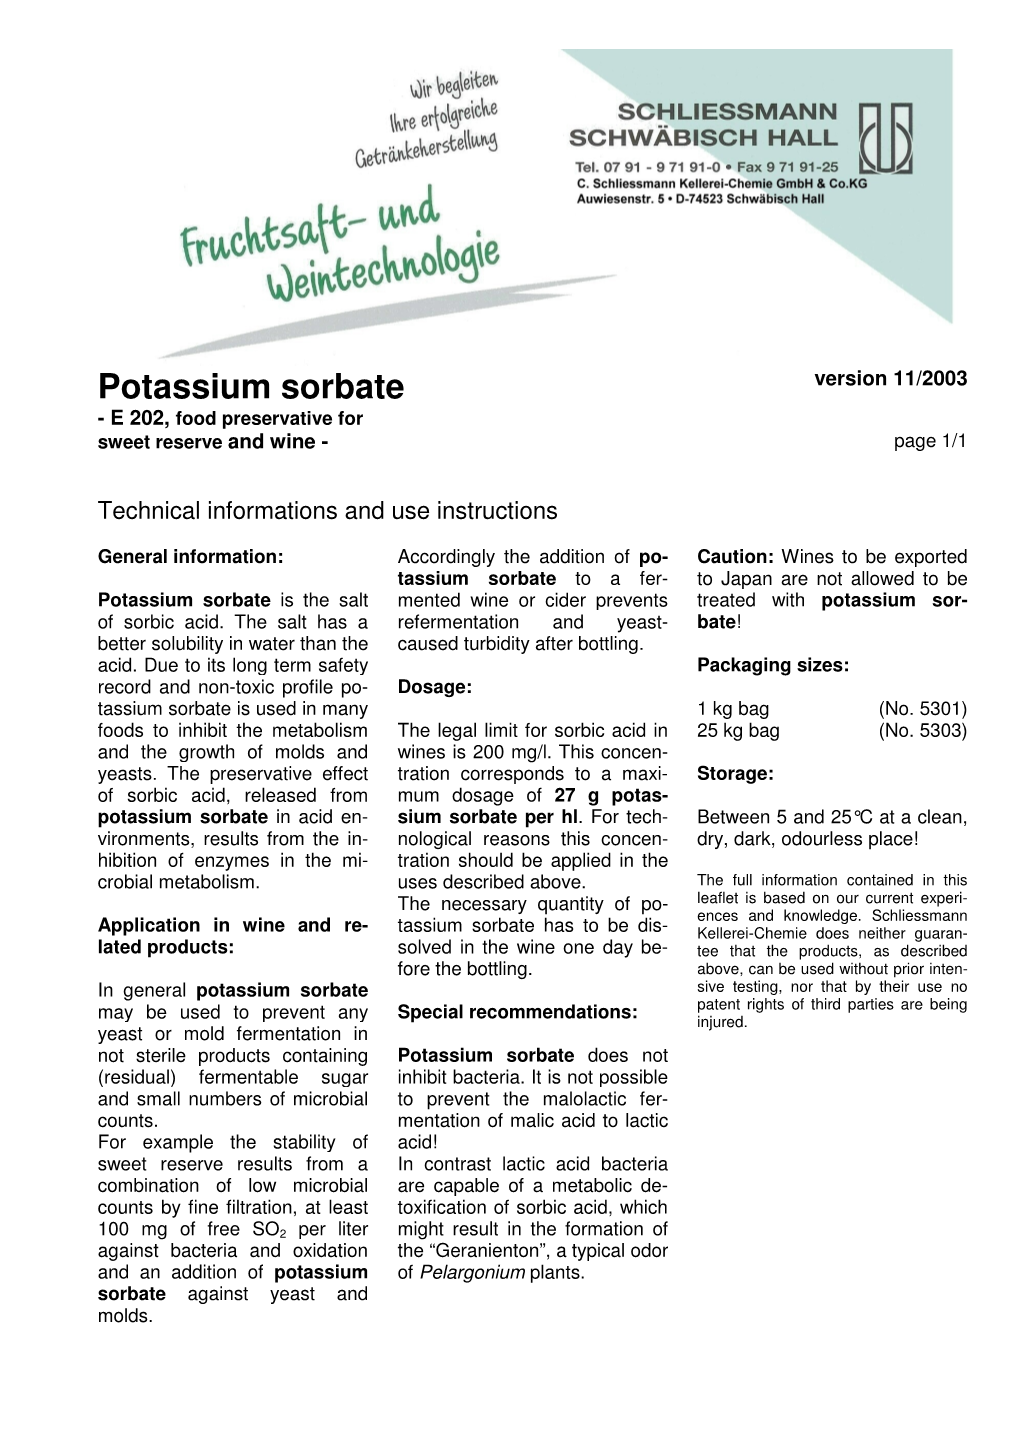 Potassium Sorbate Version 11/2003 - E 202, Food Preservative for Sweet Reserve and Wine - Page 1/1